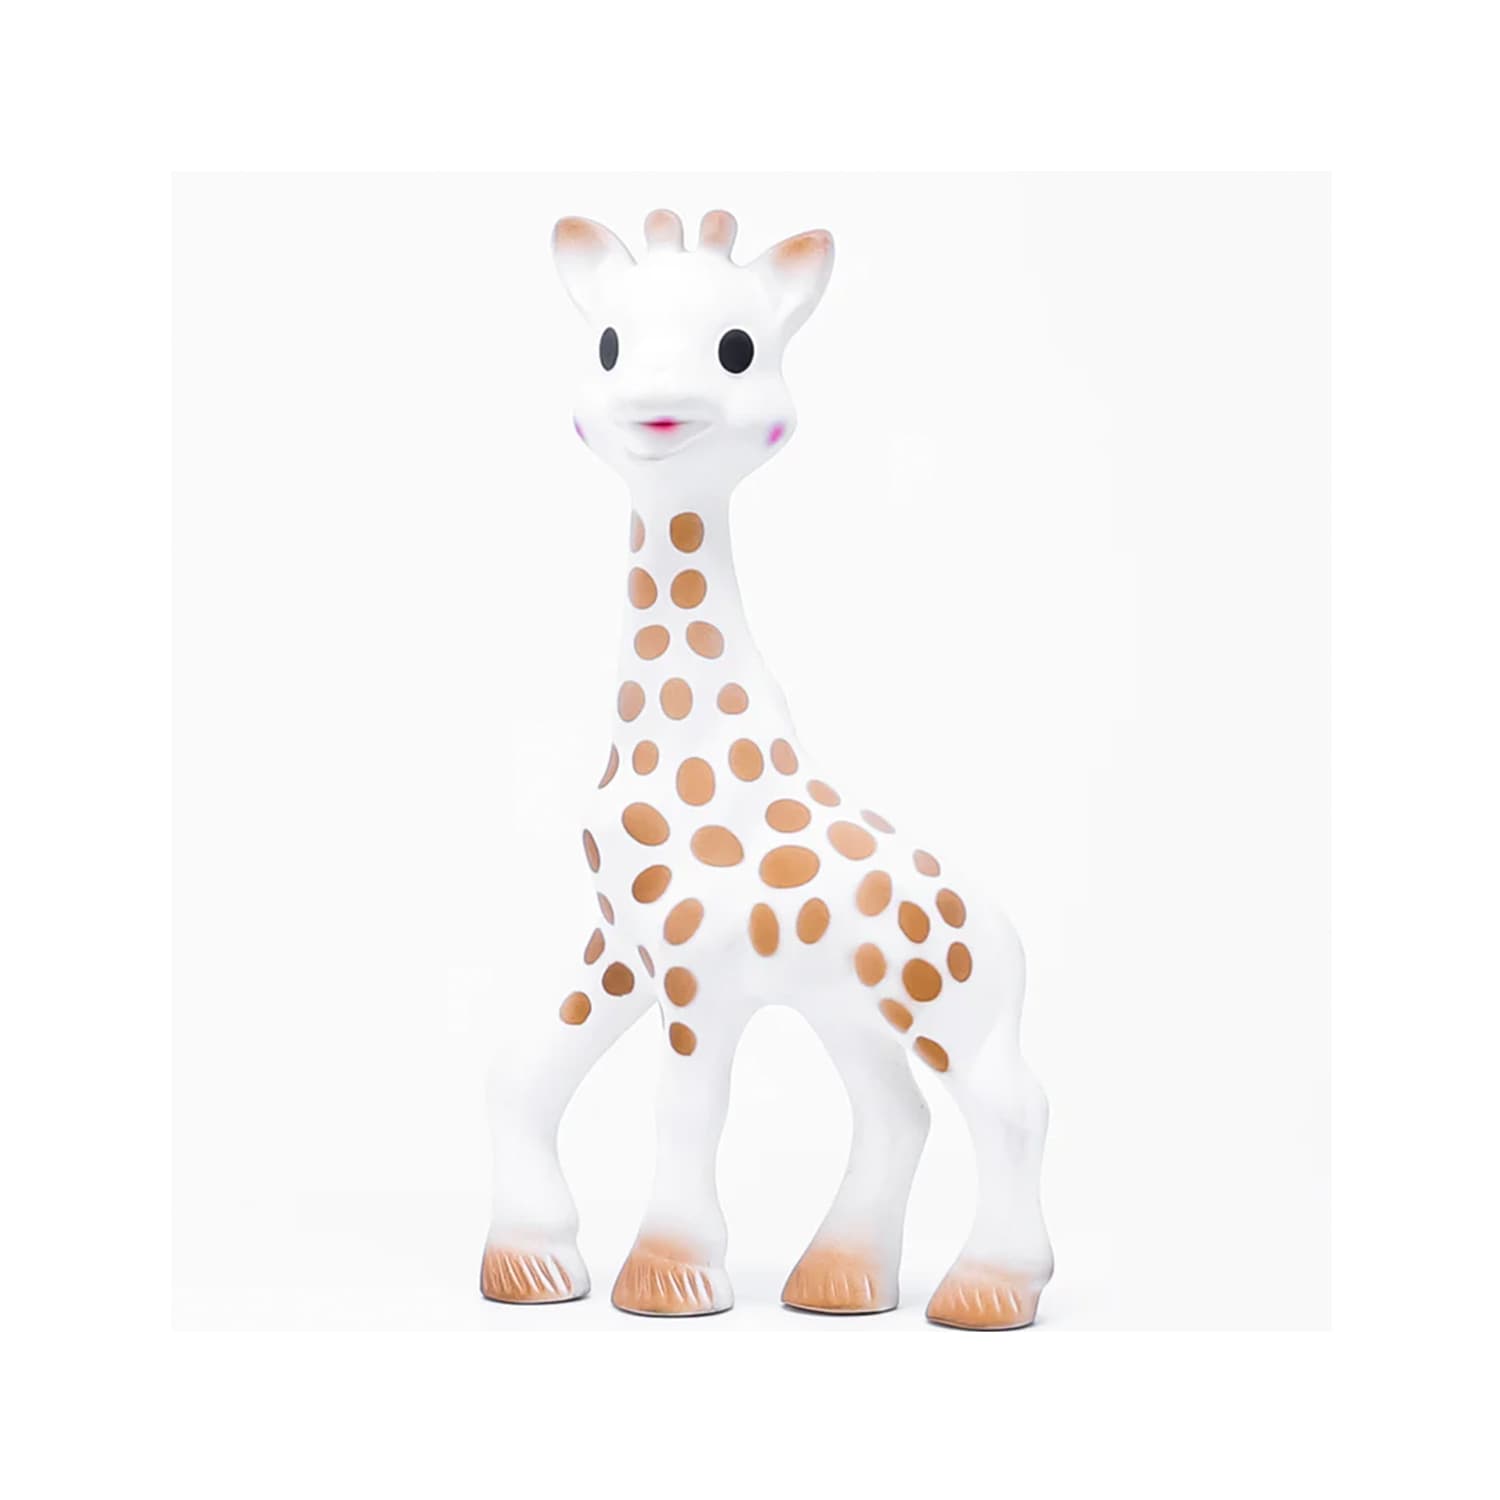 5 Reasons to Celebrate the Iconic Sophie la girafe toy on her 60th  Anniversary